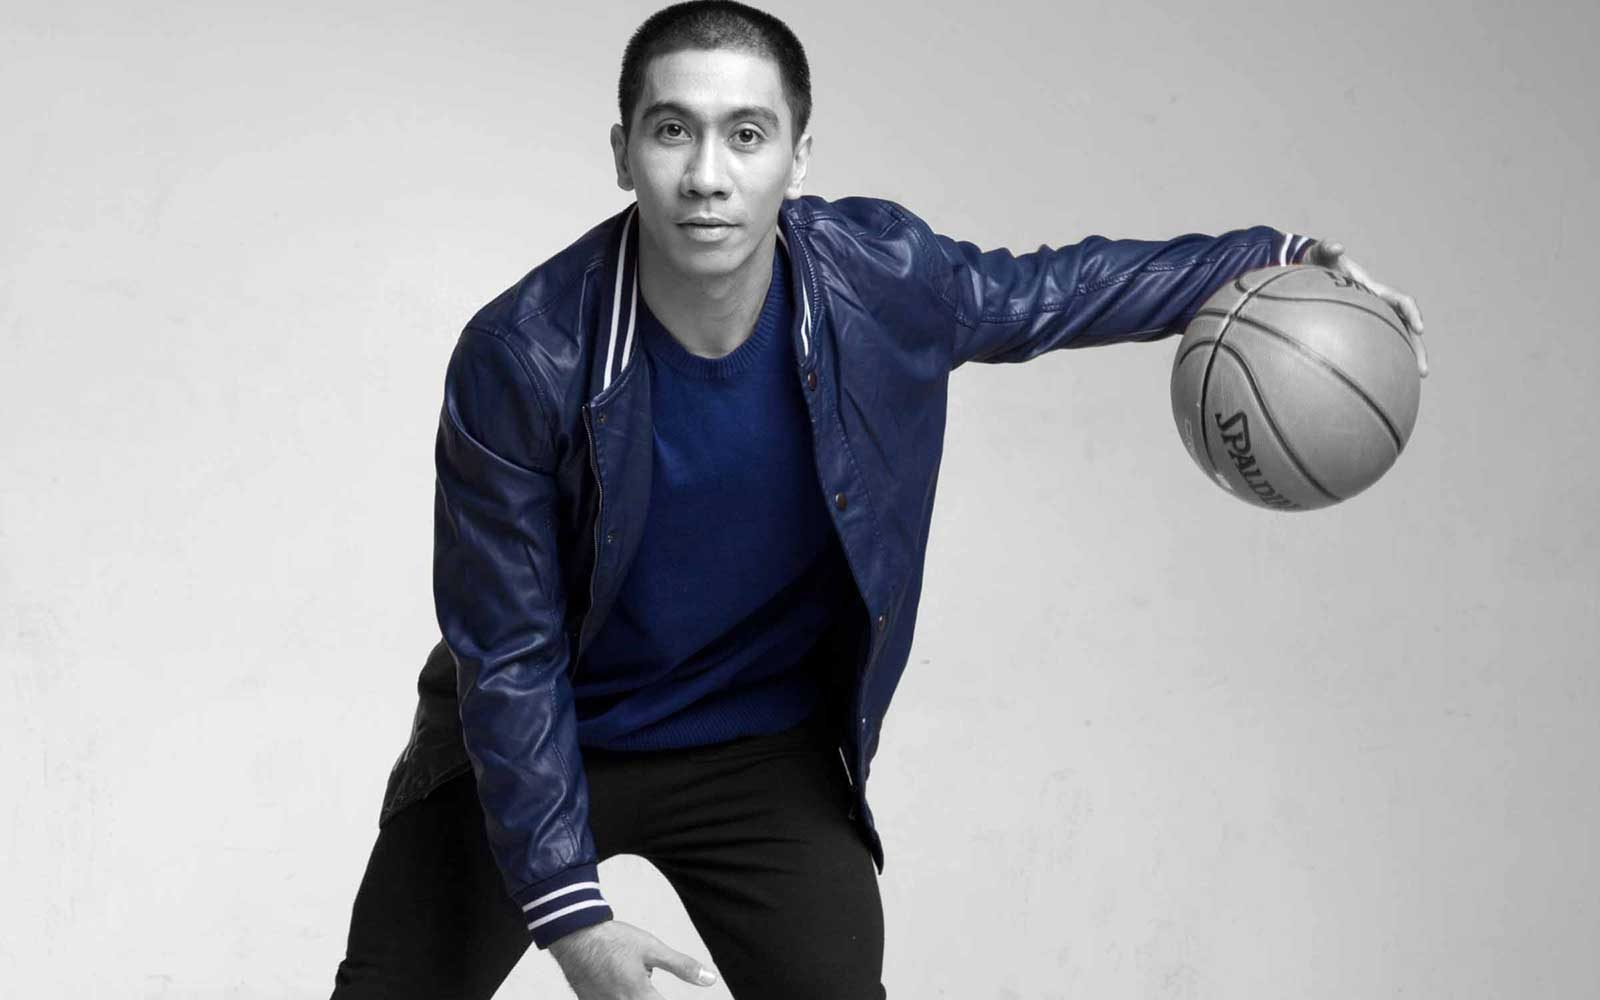 For the ages: How LA Tenorio, Ateneo ended La Salle’s dynasty